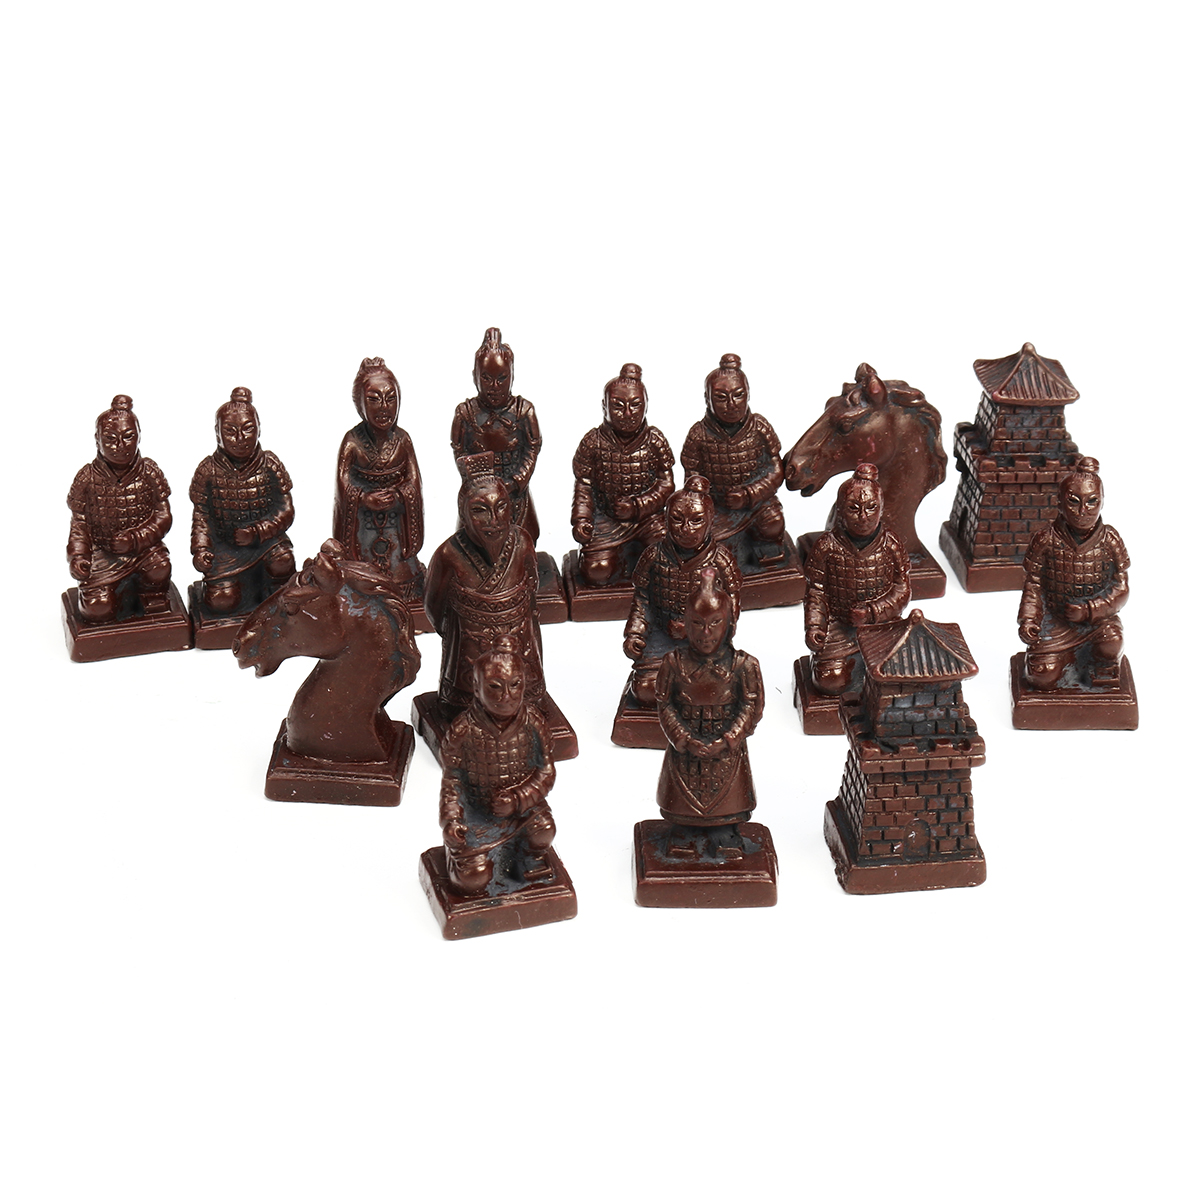 Vintage-Wooden-Chinese-Chess-Board-Table-Game-Set-Pieces-Gift-Toy-Collectibles-1454841-7